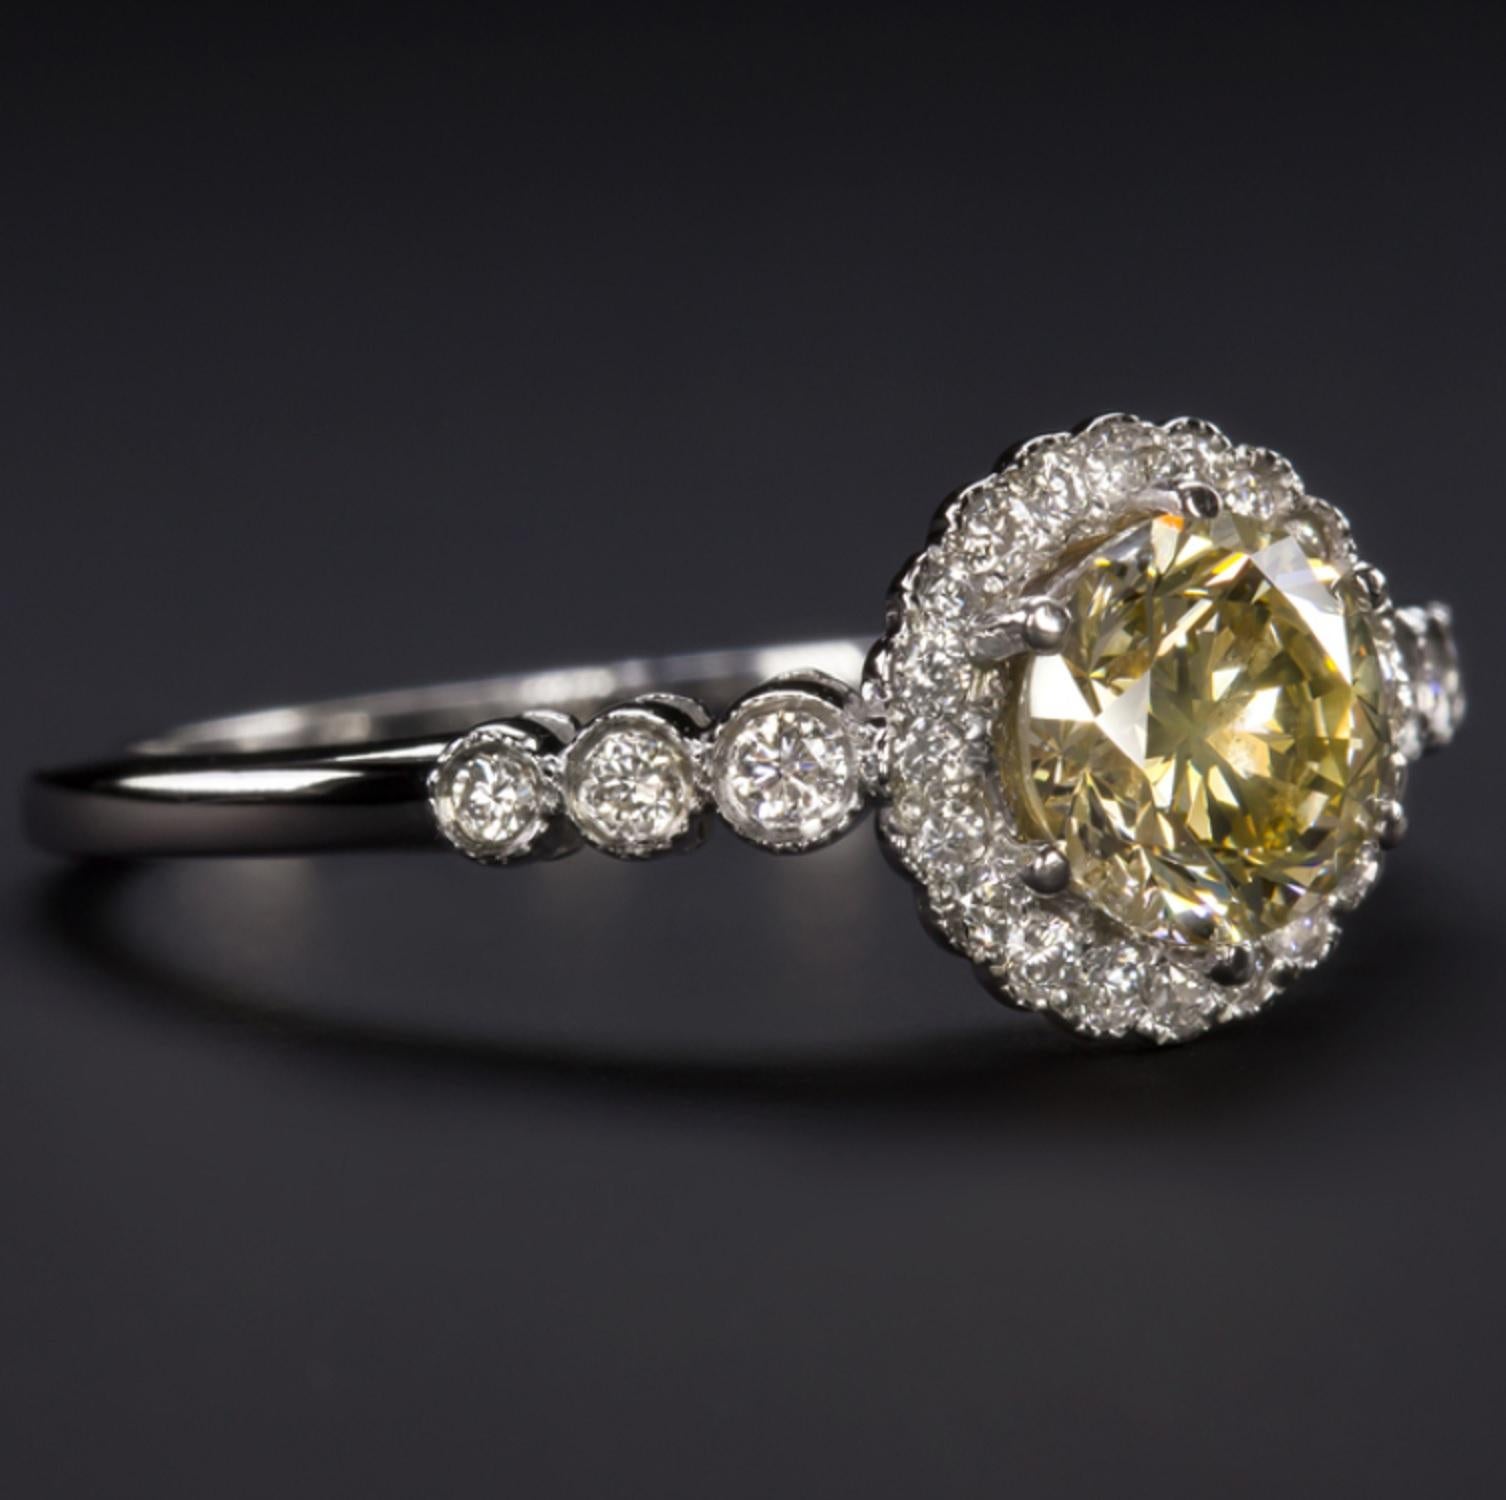 This yellow beautiful diamond ring is stunning! Consider the main stone weights approx. 0.90 carats and is absolutely eye clean
